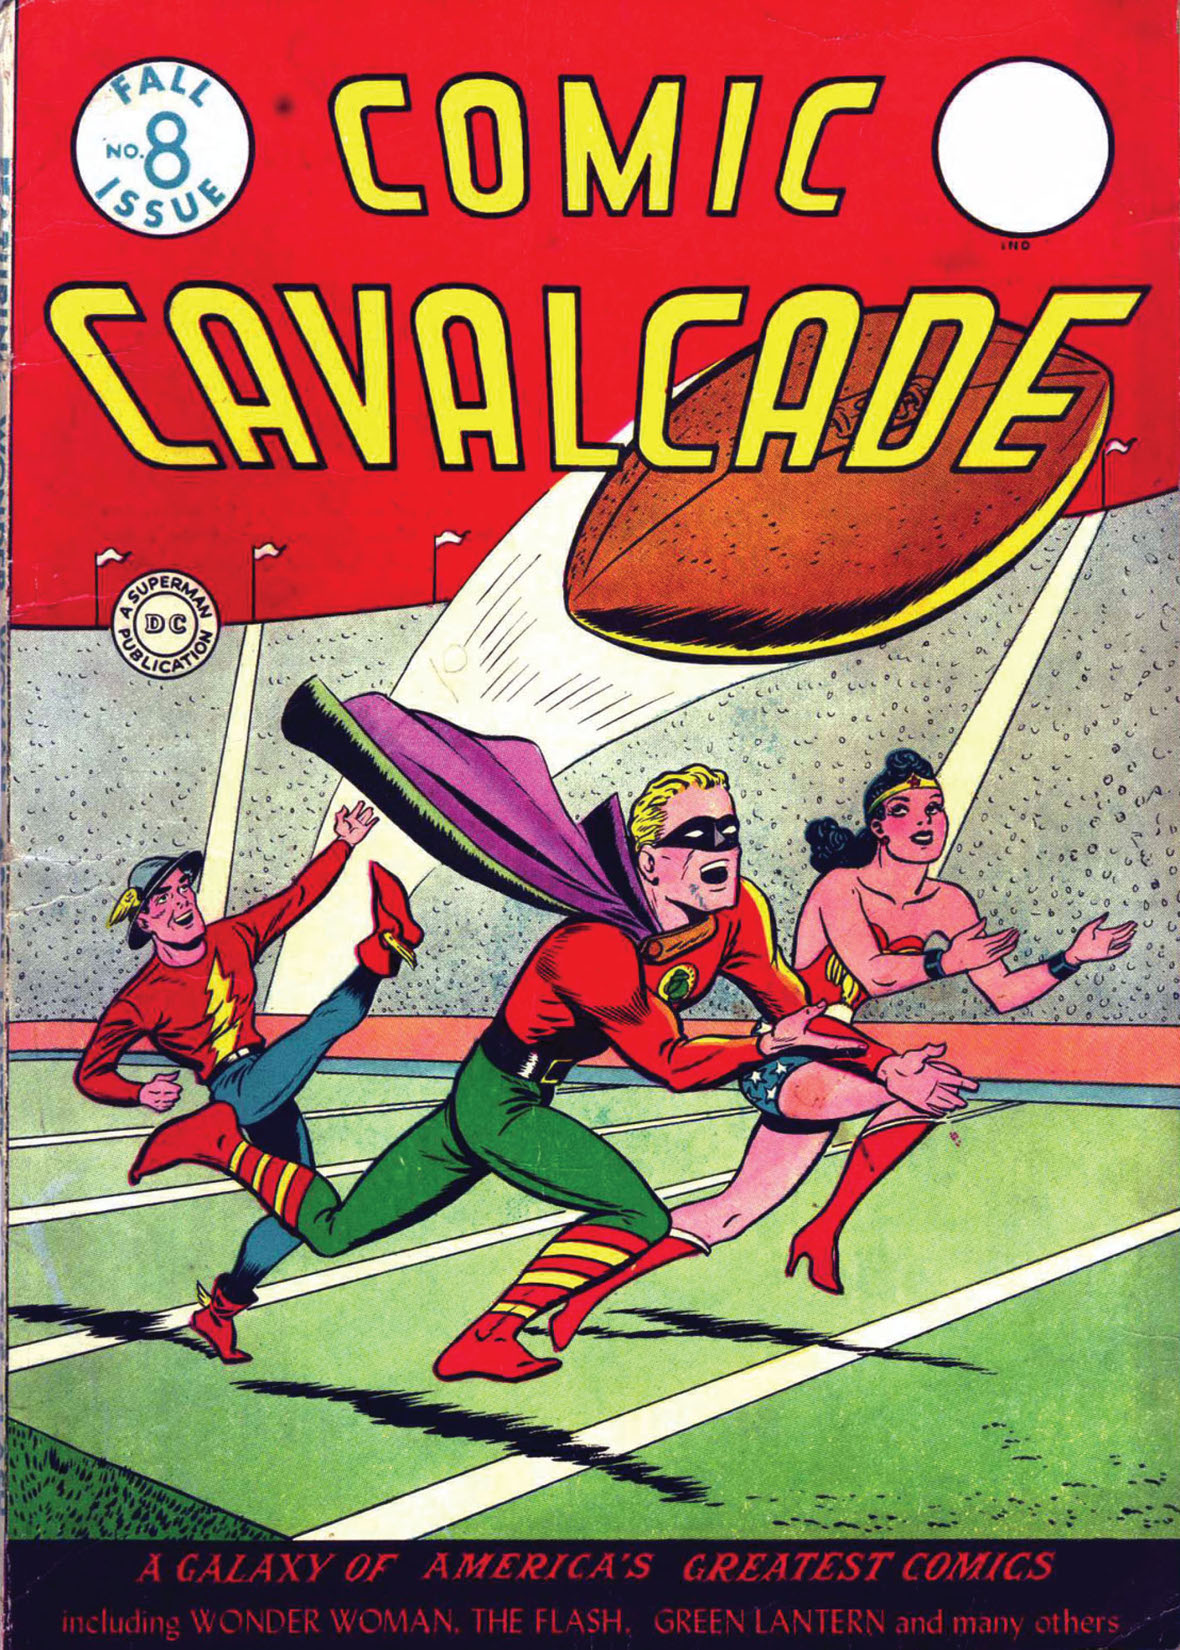 Comic Cavalcade #8 preview images